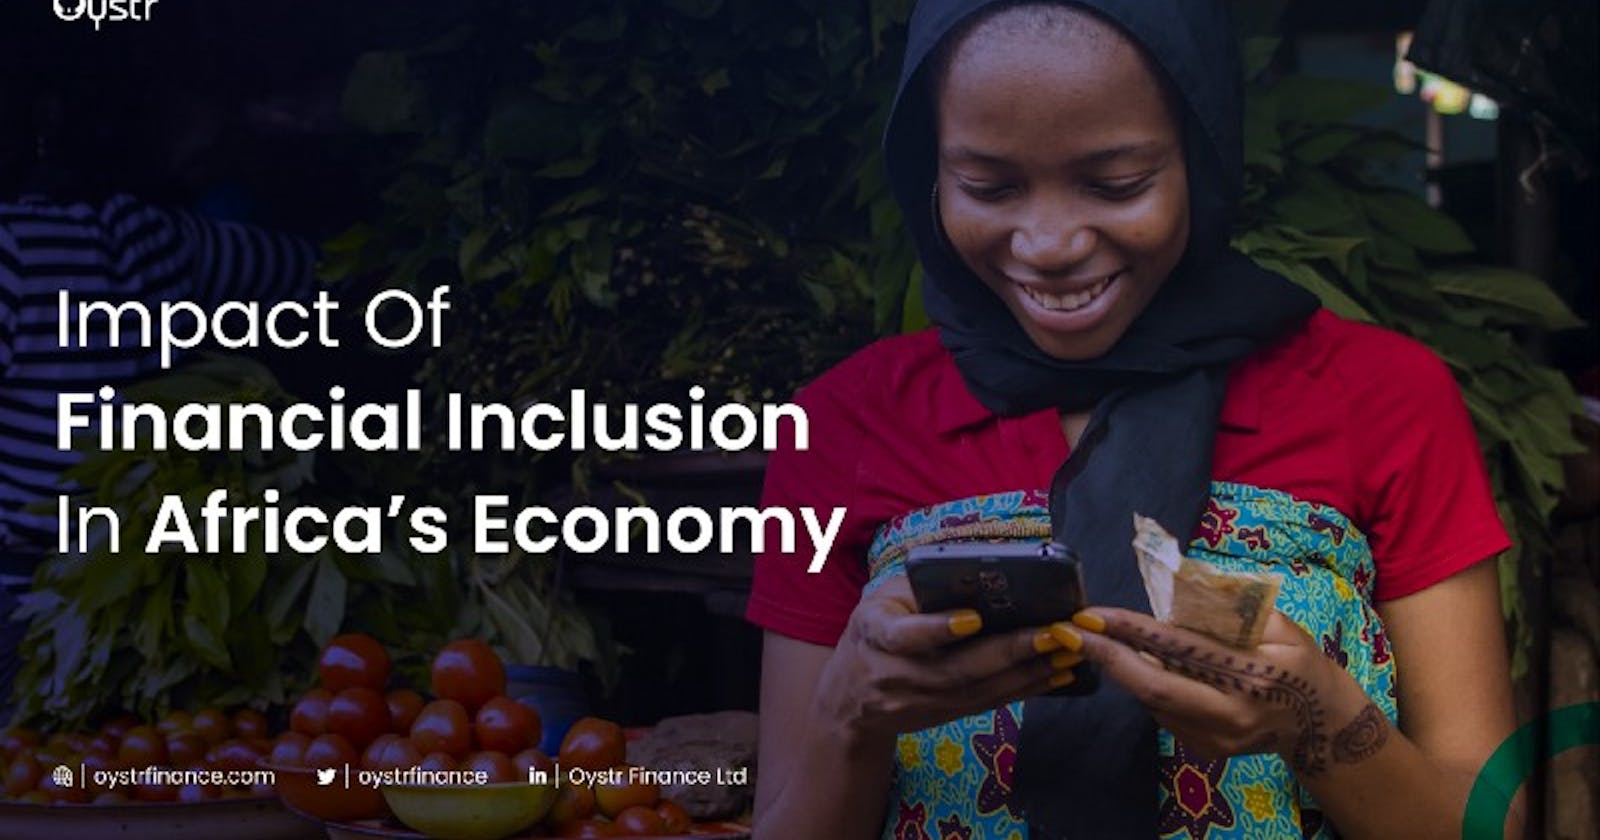 Impact of Financial Inclusion on Africa’s Economy